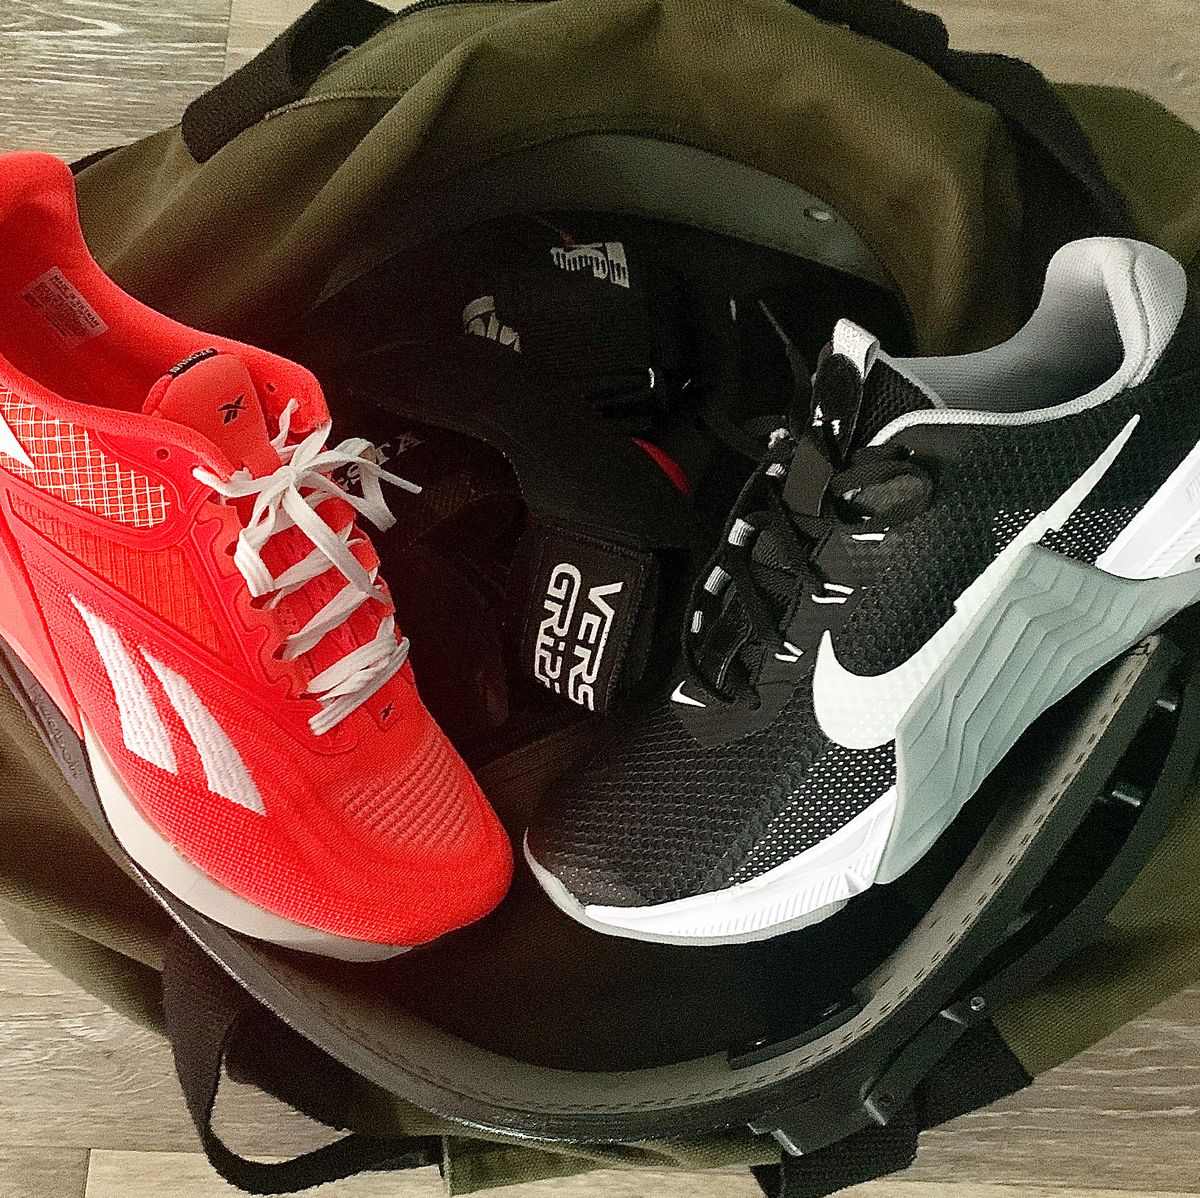 Reebok X2 vs. 7 Review: Which CrossFit is King?